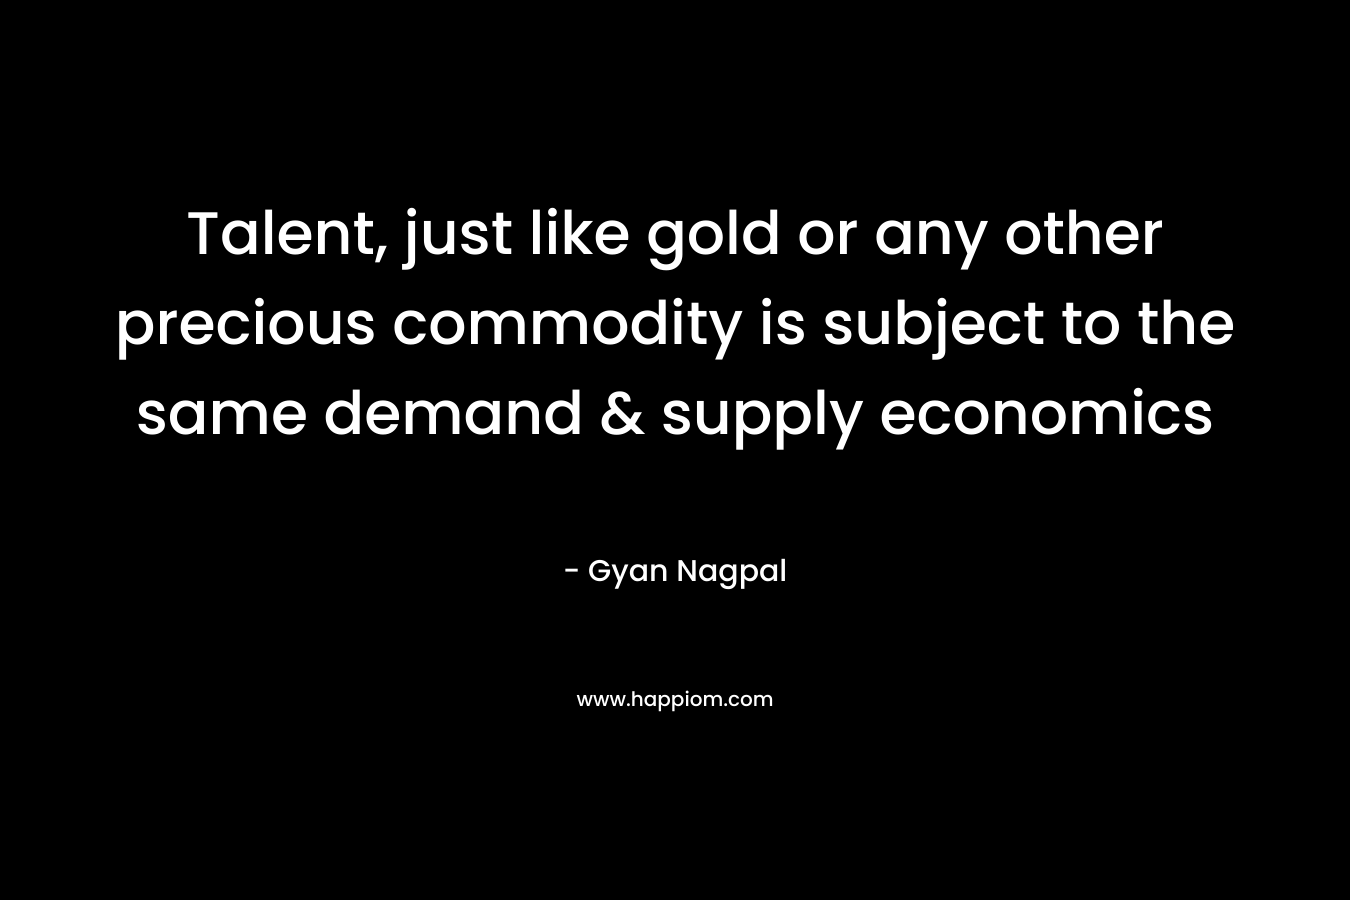 Talent, just like gold or any other precious commodity is subject to the same demand & supply economics – Gyan Nagpal